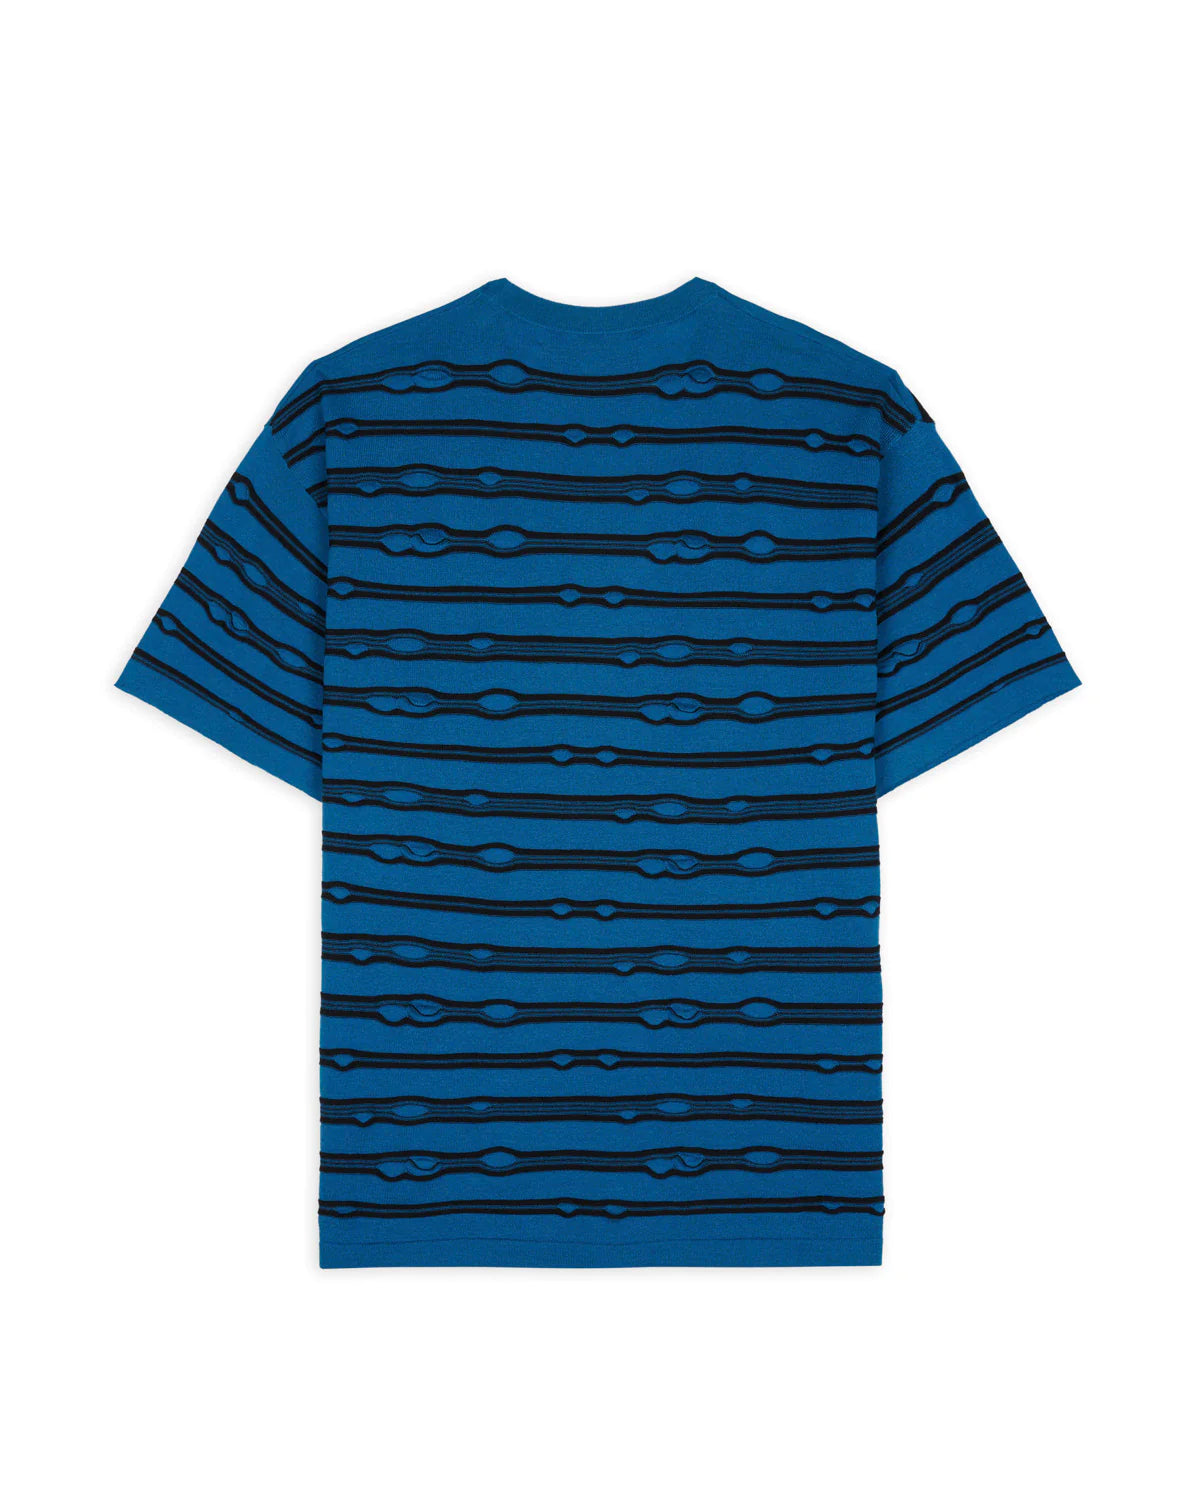 PUCKERED STRIPED TEE - TEAL